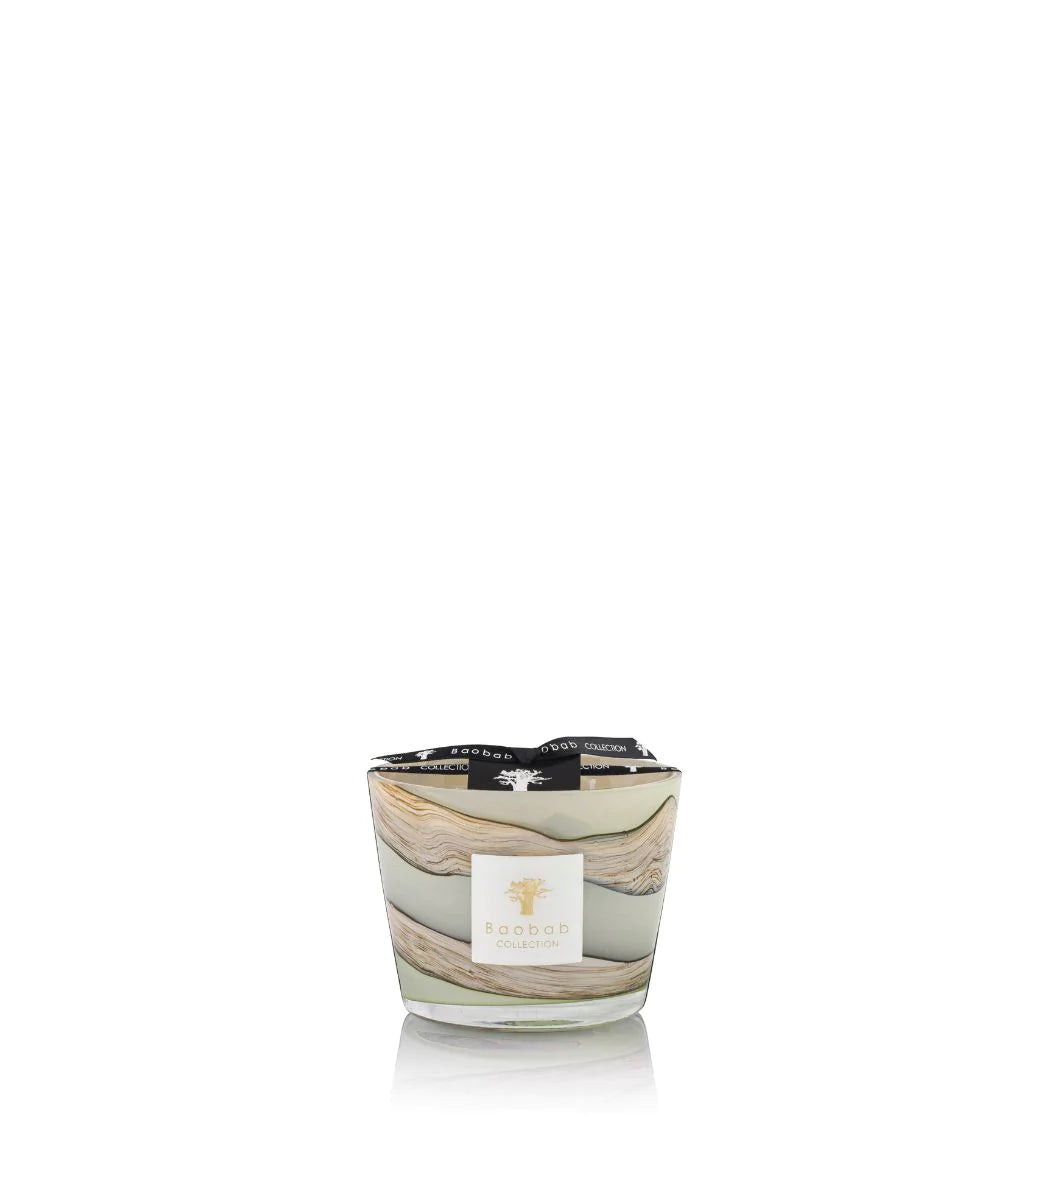 BAOBAB COLLECTION CANDLE SAND SONORA (Available in 3 Sizes)